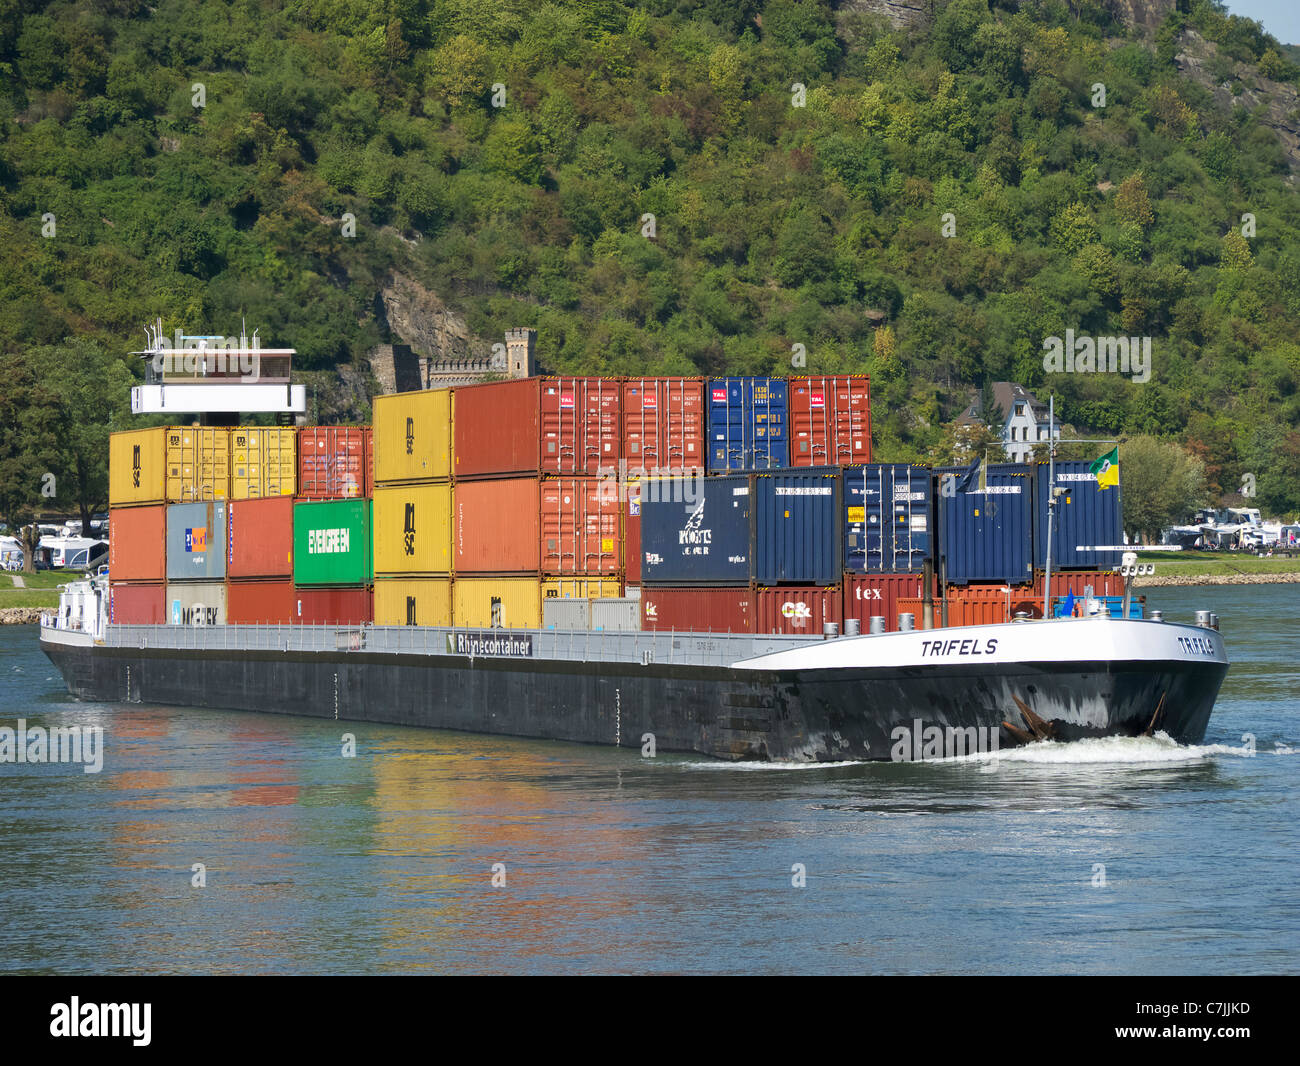 Large barge carrying container freight sailing up the River Rhine in Germany Stock Photo